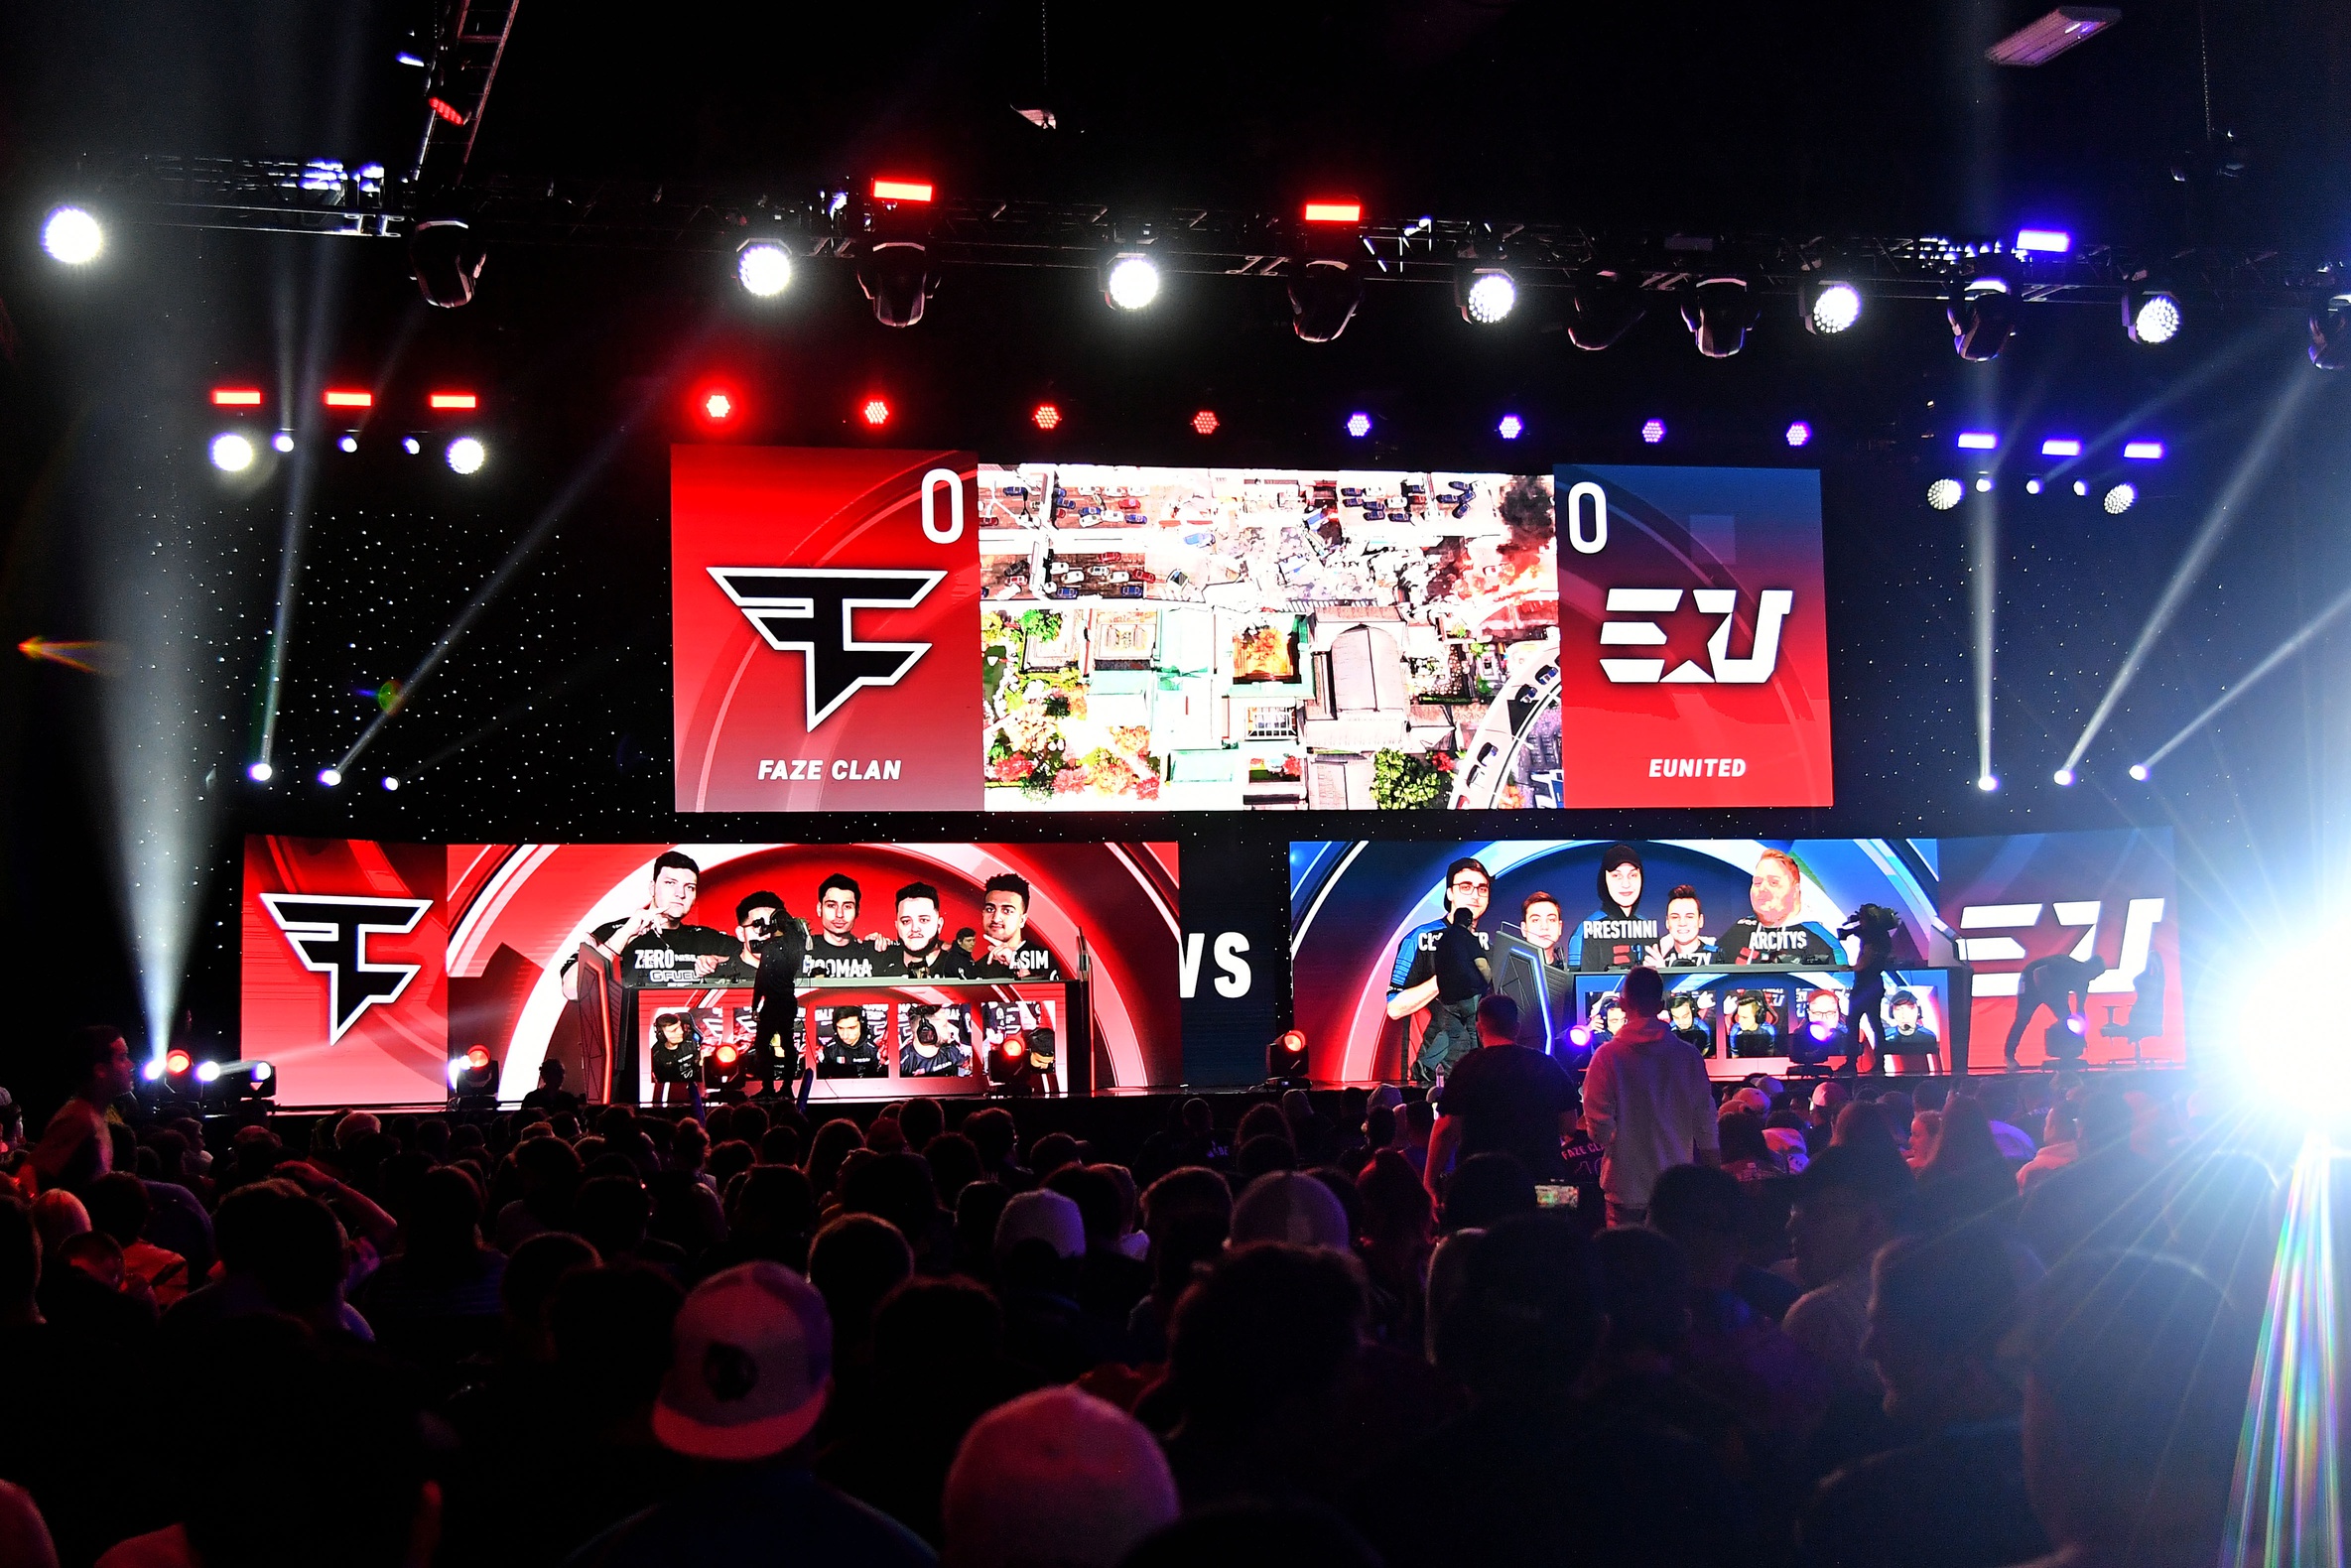 Esports Teams Experienced Social Growth With Live Sports Stoppage